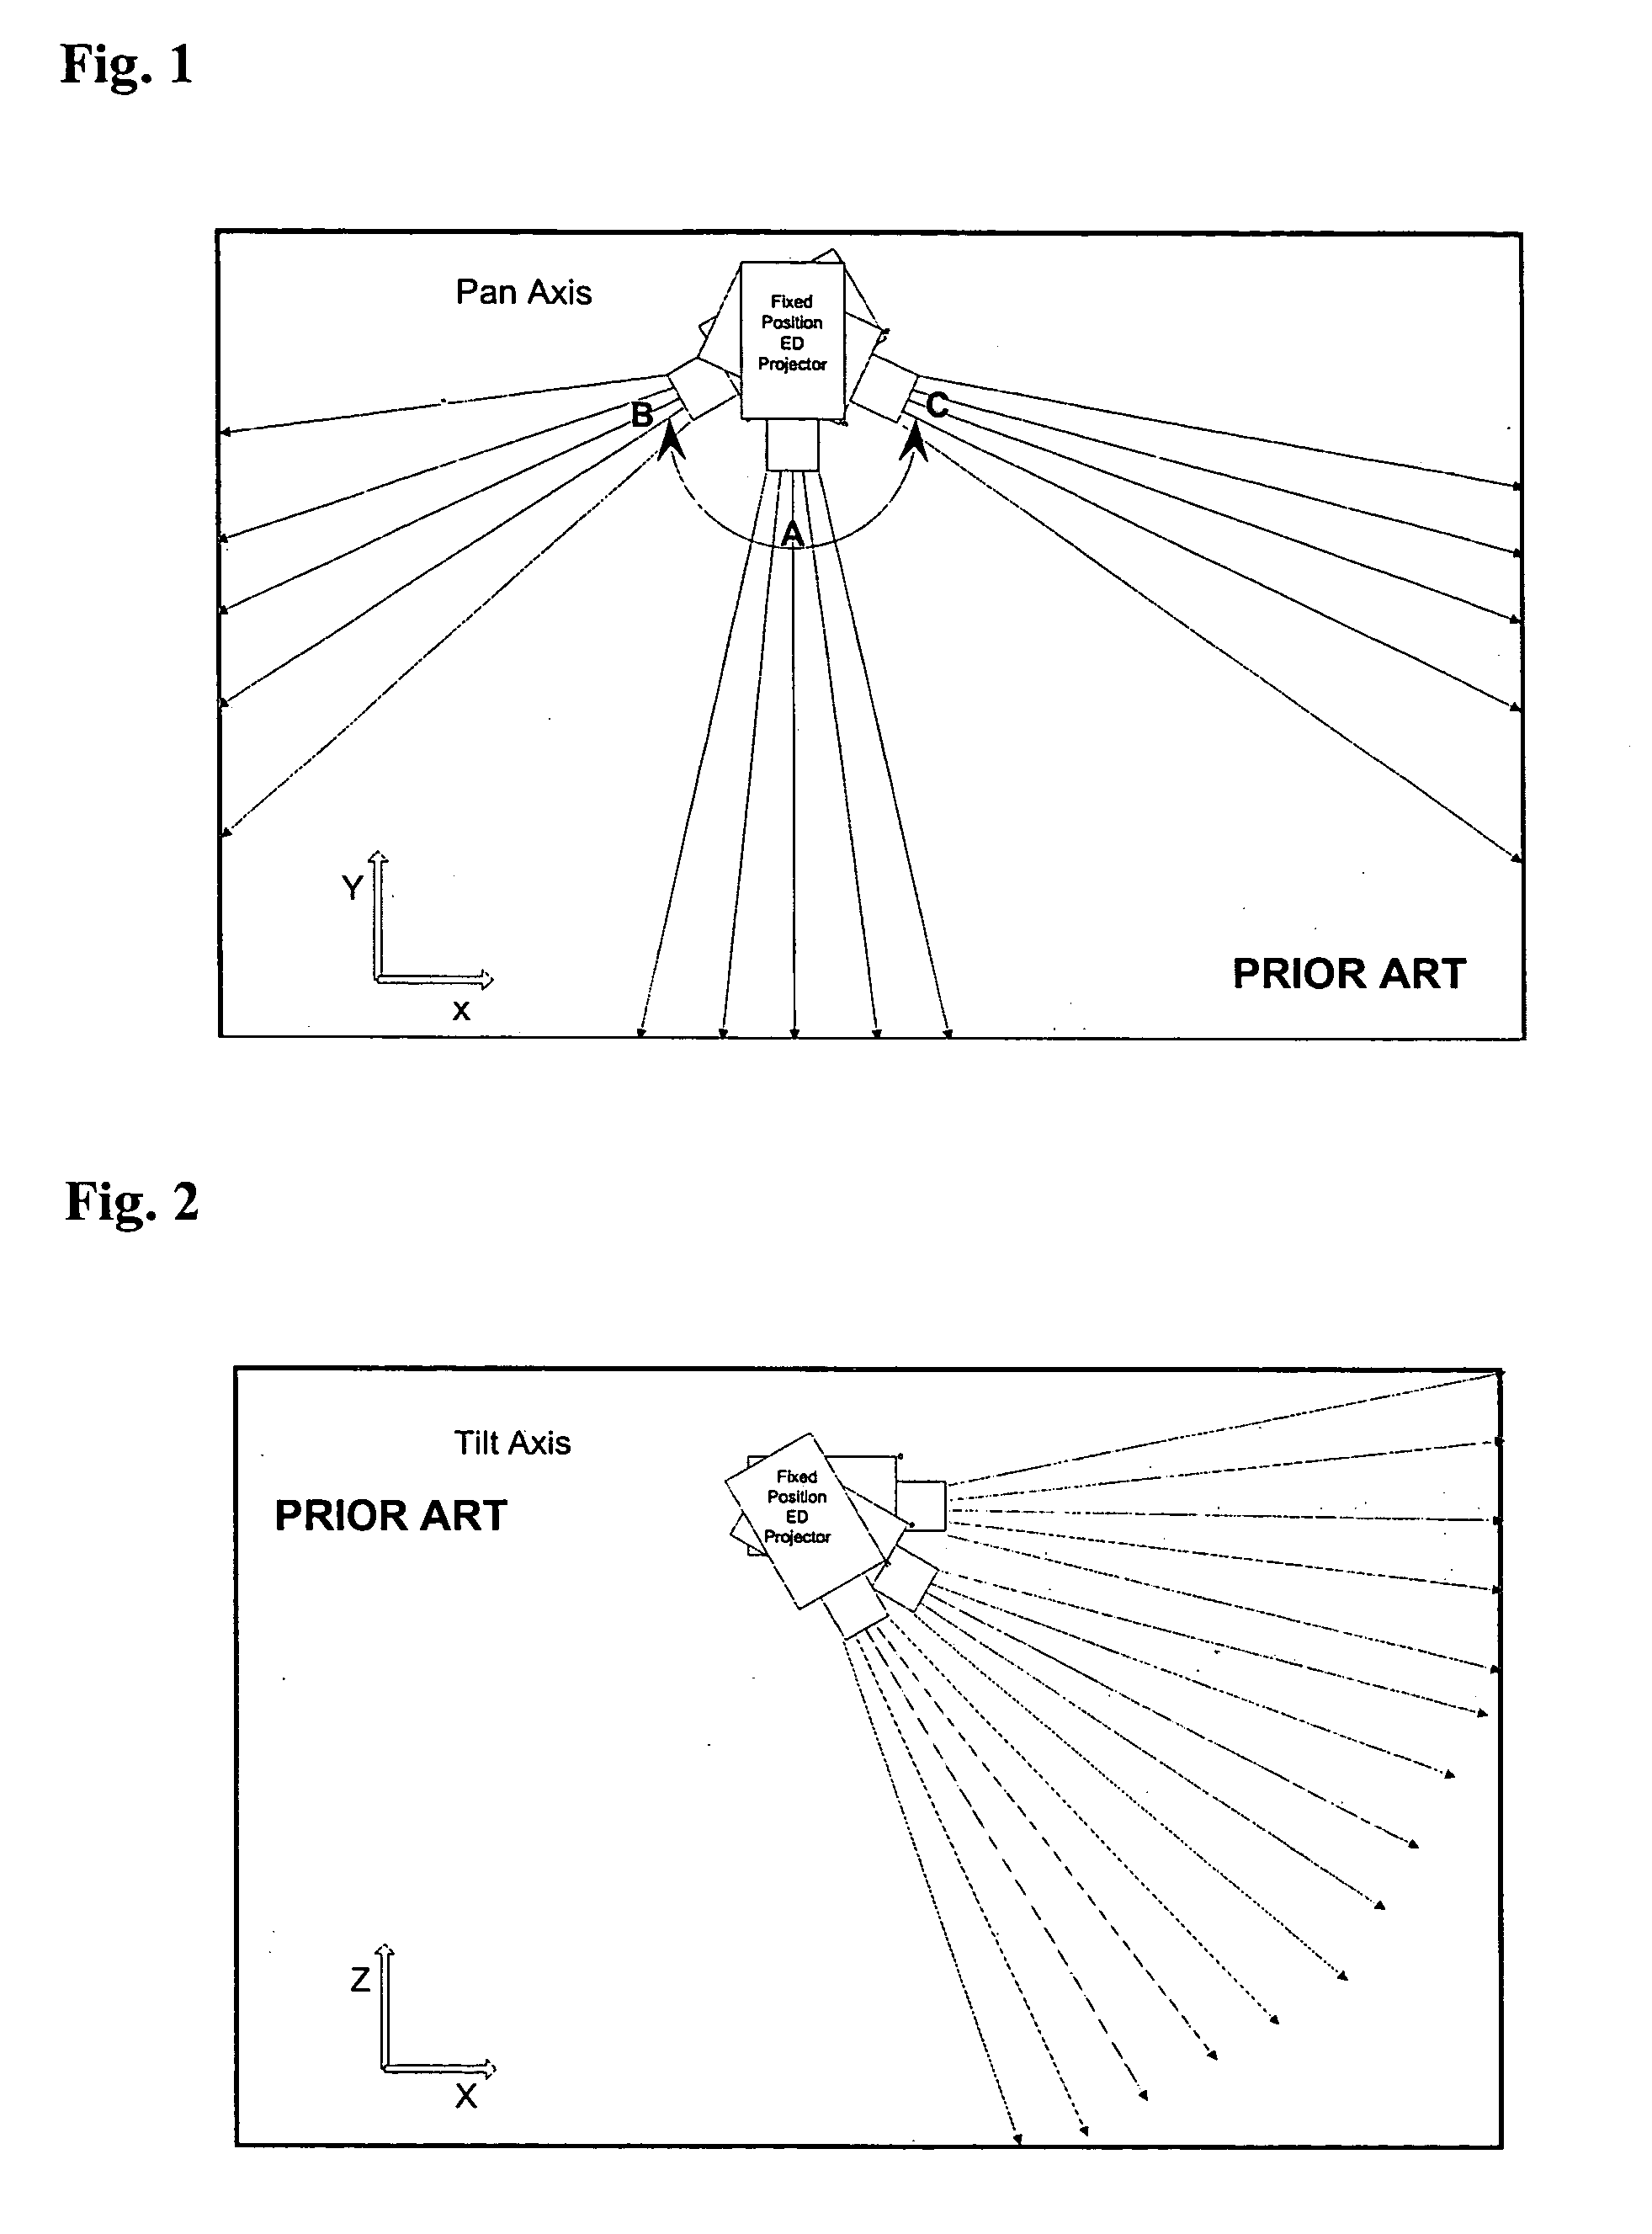 System and method for positioning projectors in space to steer projections and afford interaction